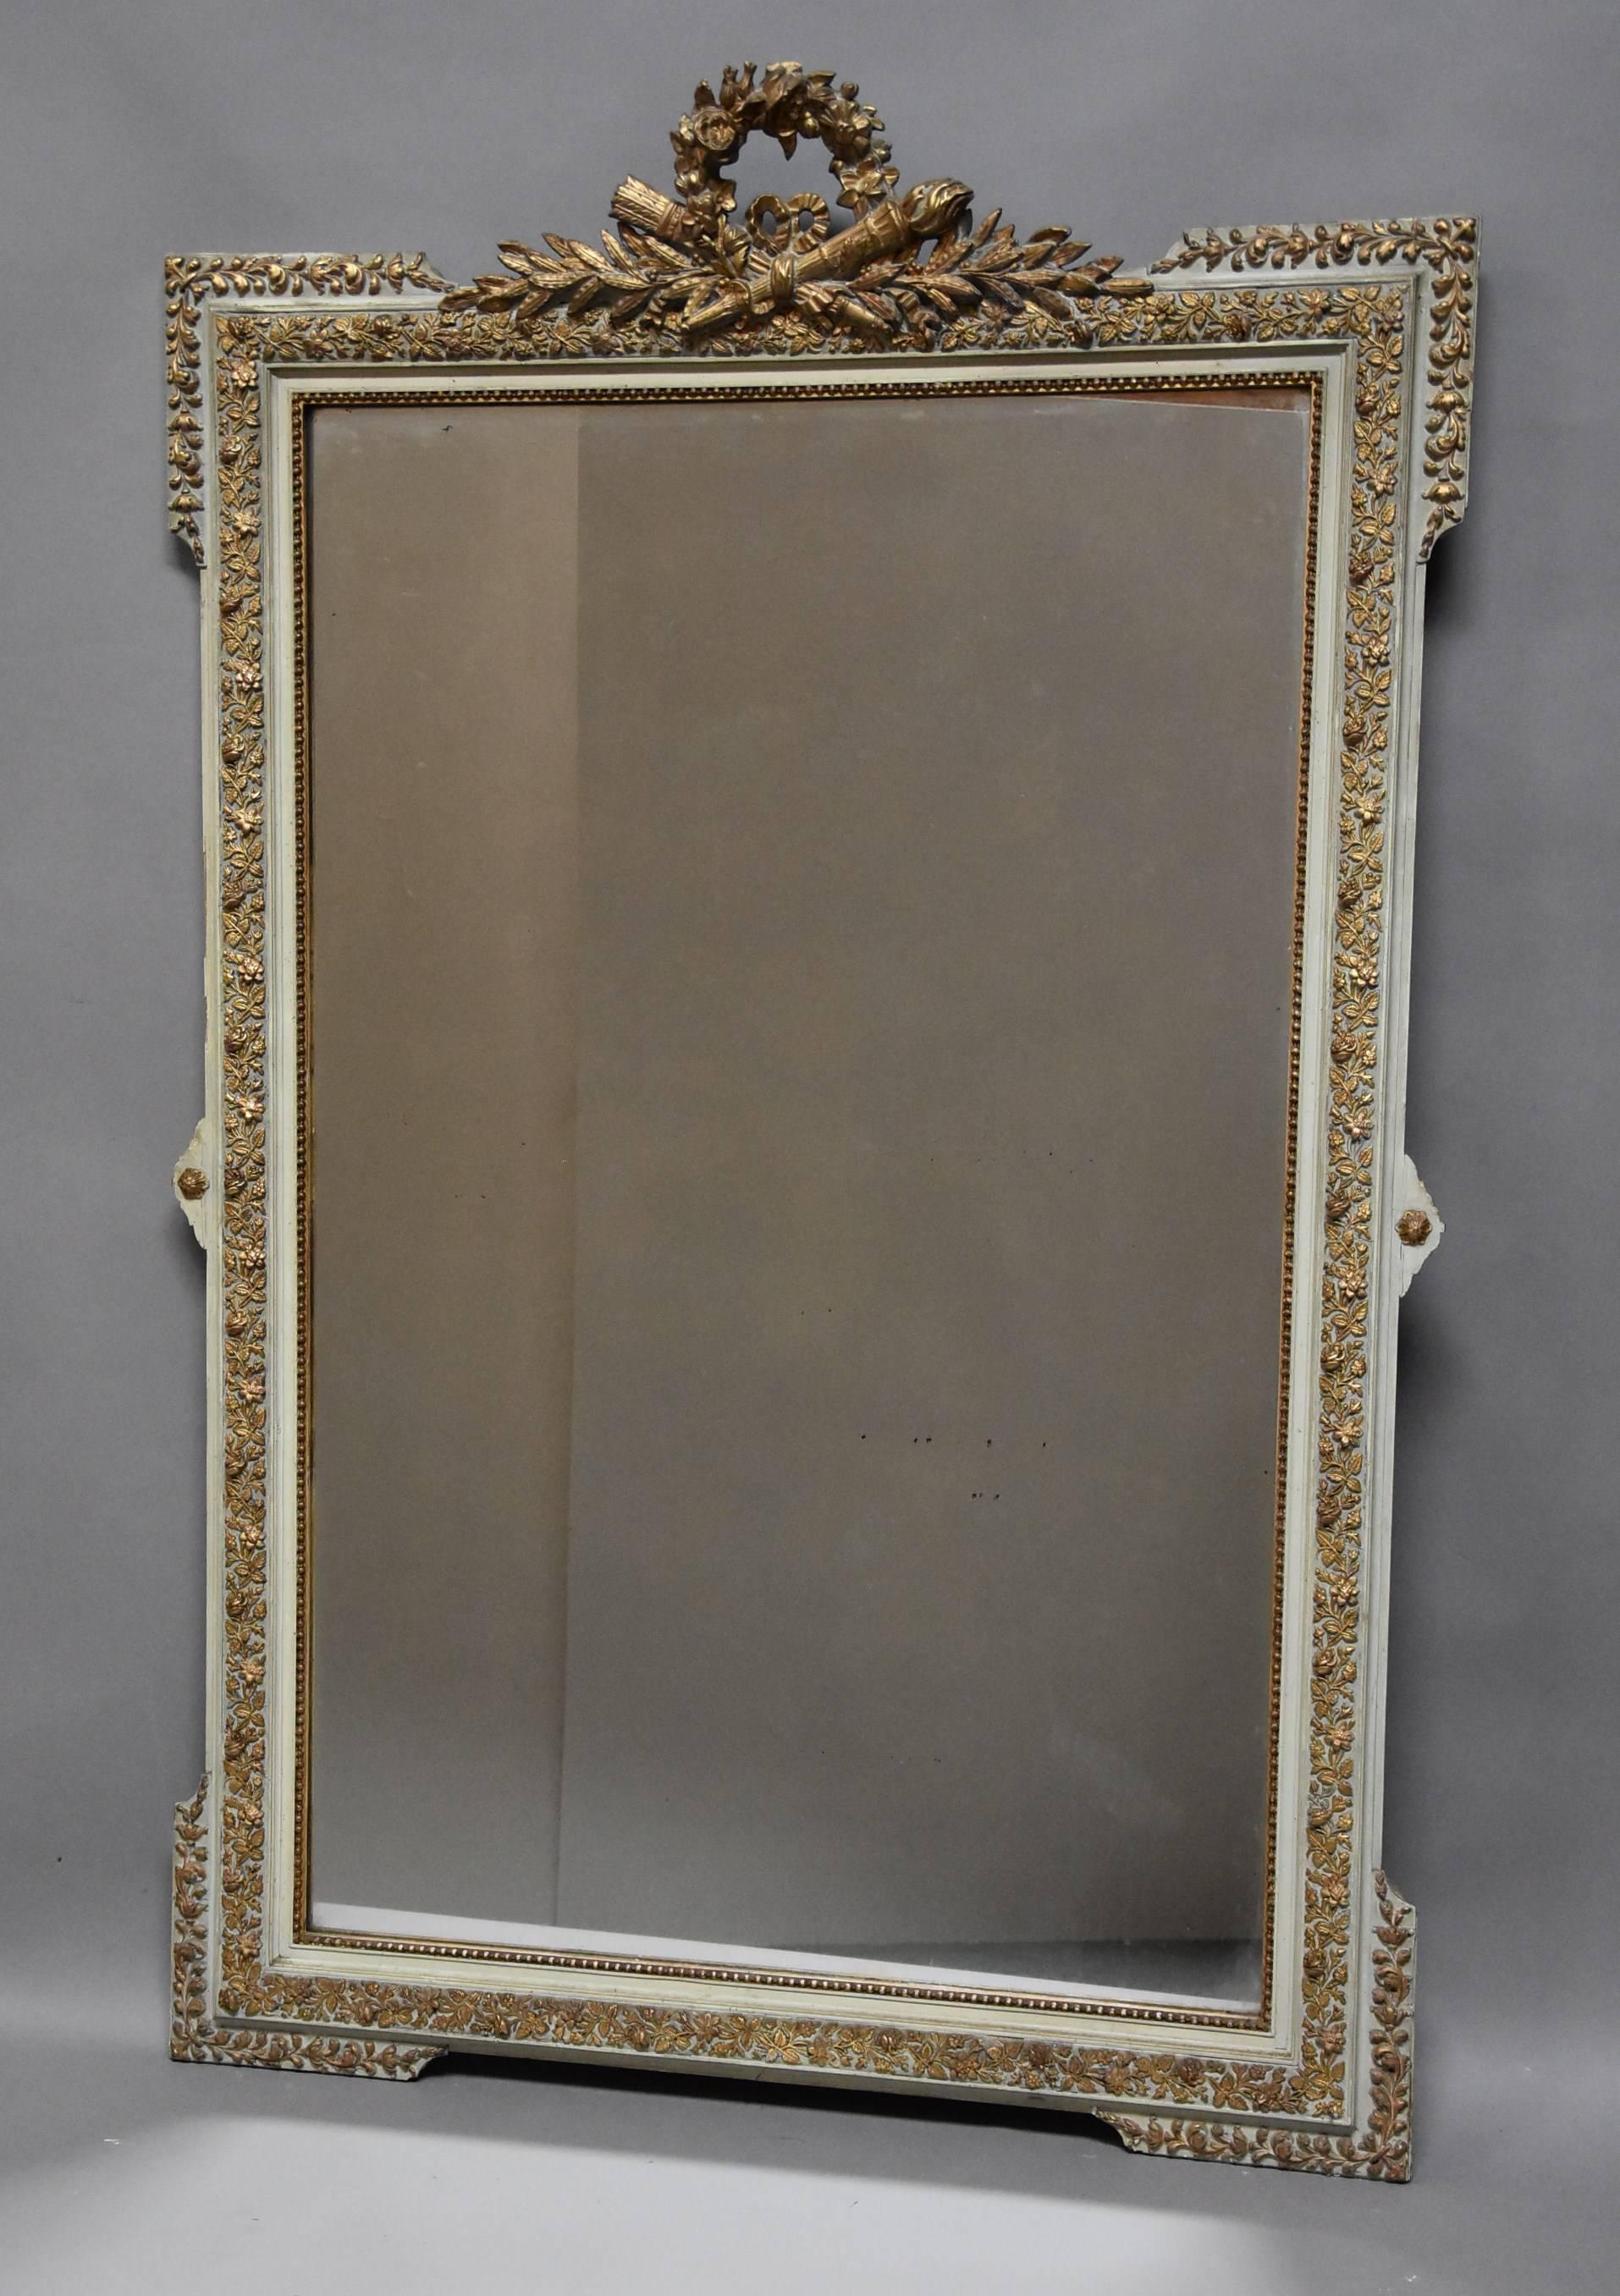 A large late 19th century highly decorative French gilt and painted mirror in the Louis XVI style.

The mirror consists of a floral wreath to the top with ribbon, torch and quiver and arrow decoration with foliage below.

This leads down to the